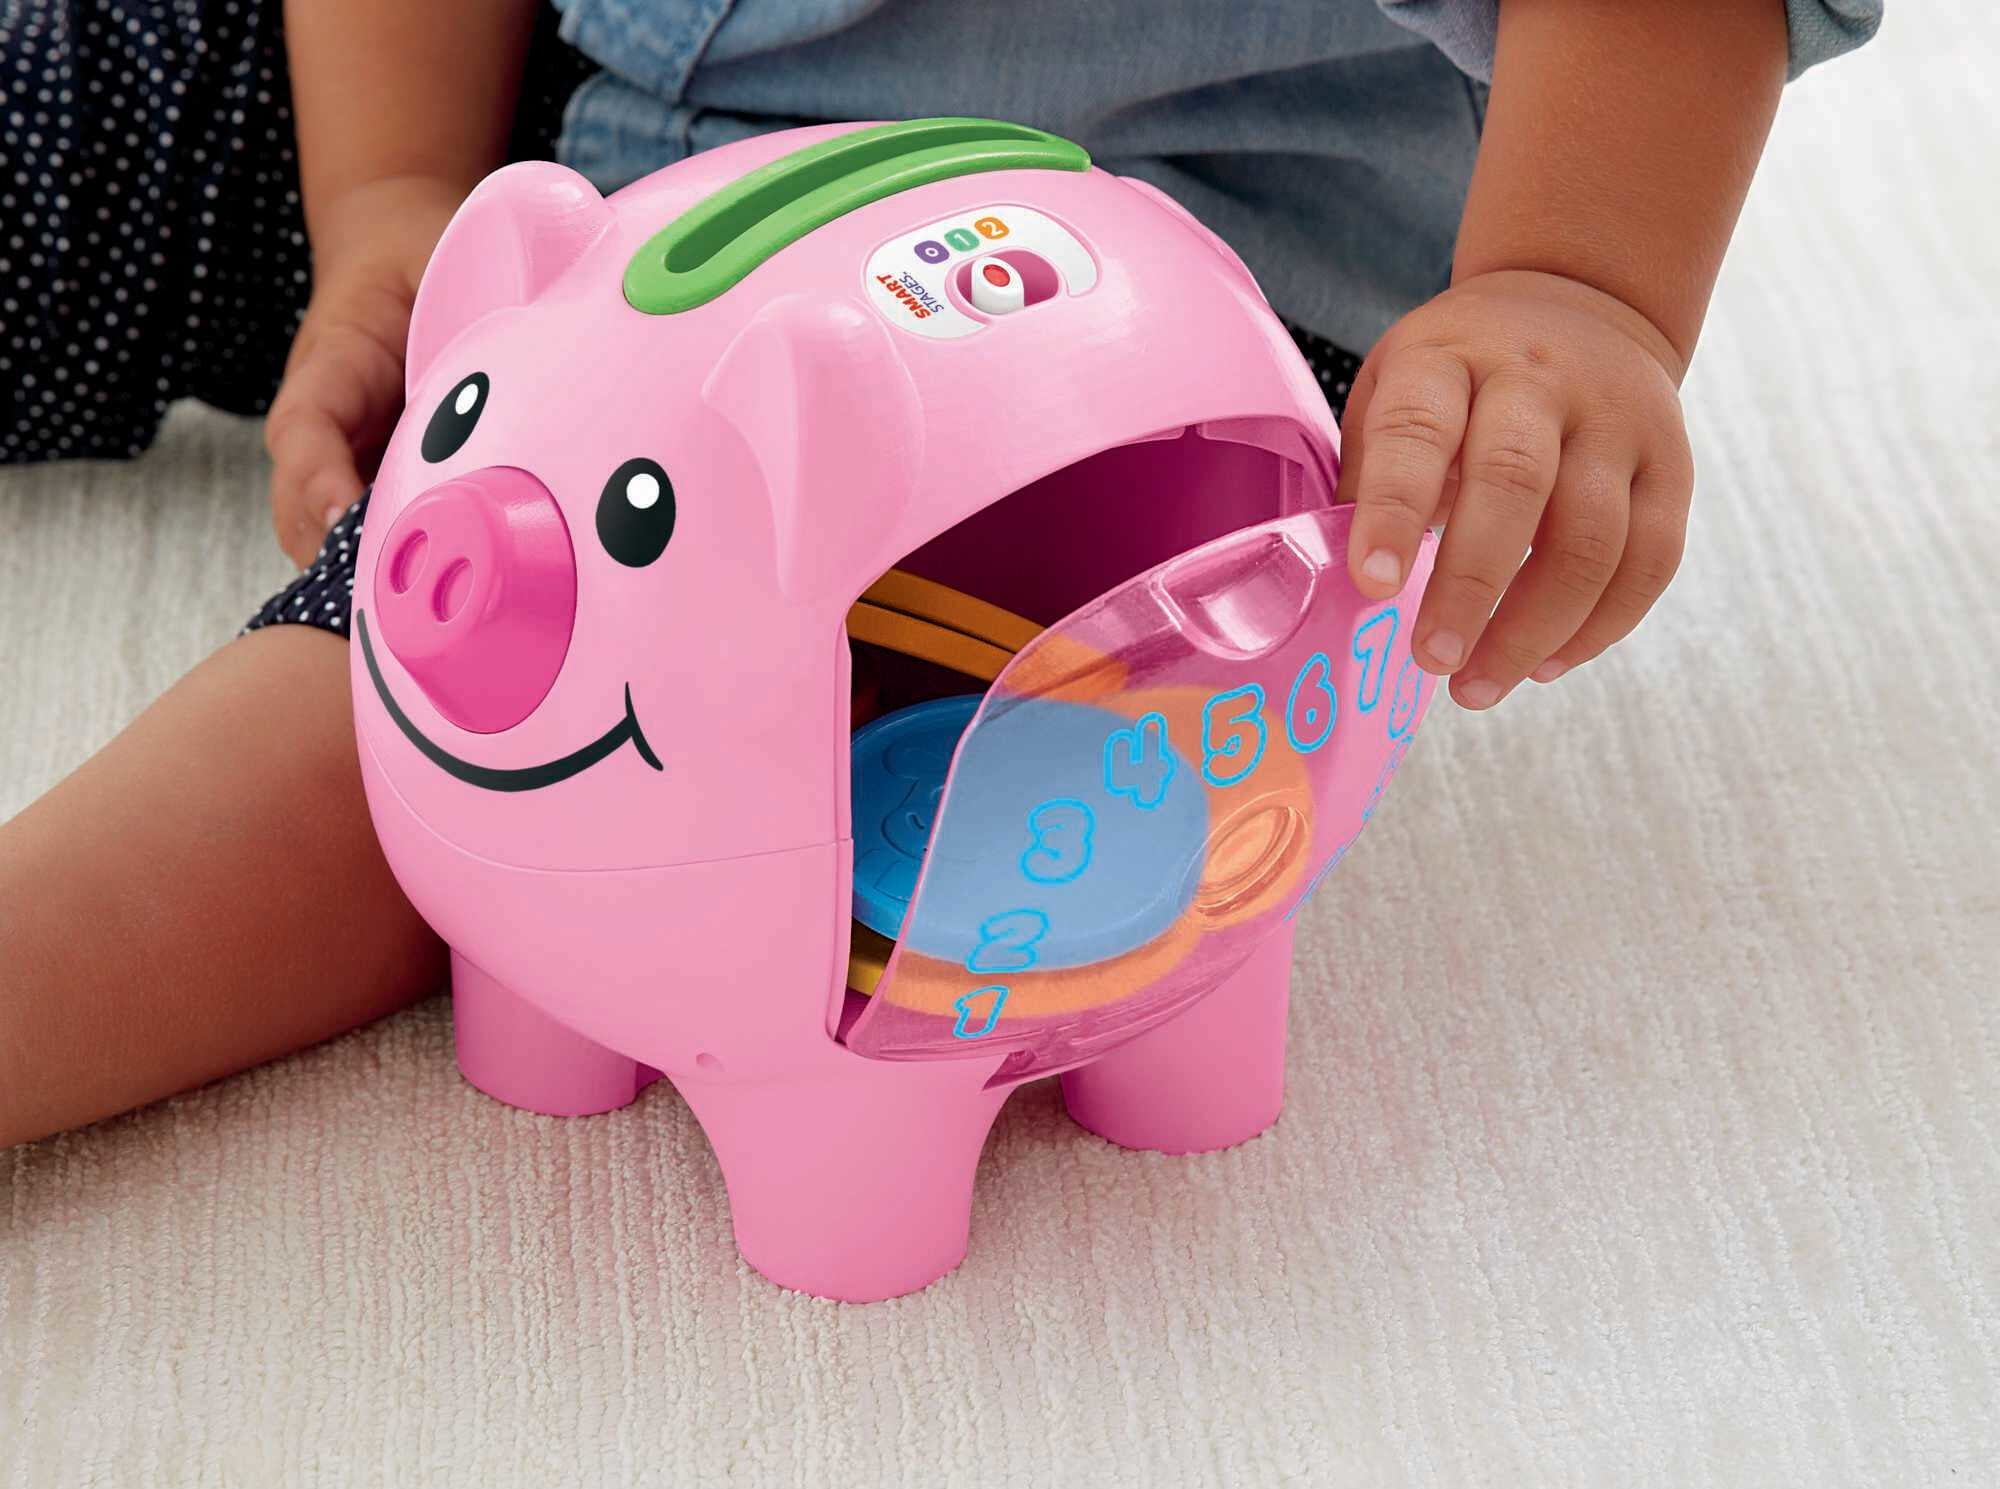 Fisher-Price Laugh & Learn Count & Learn Bilingual Piggy Bank